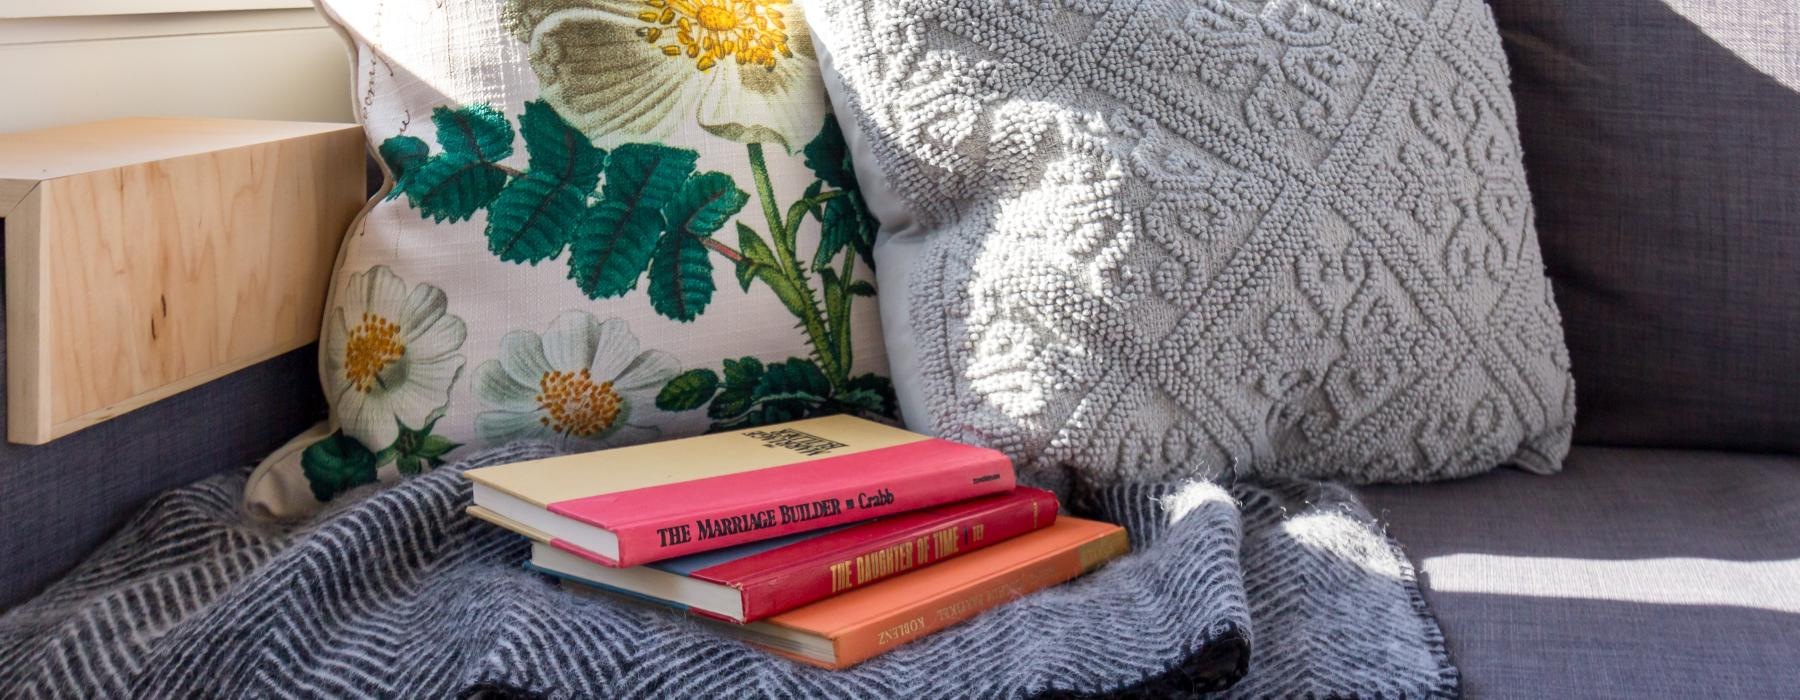 a pillow and books on a bed